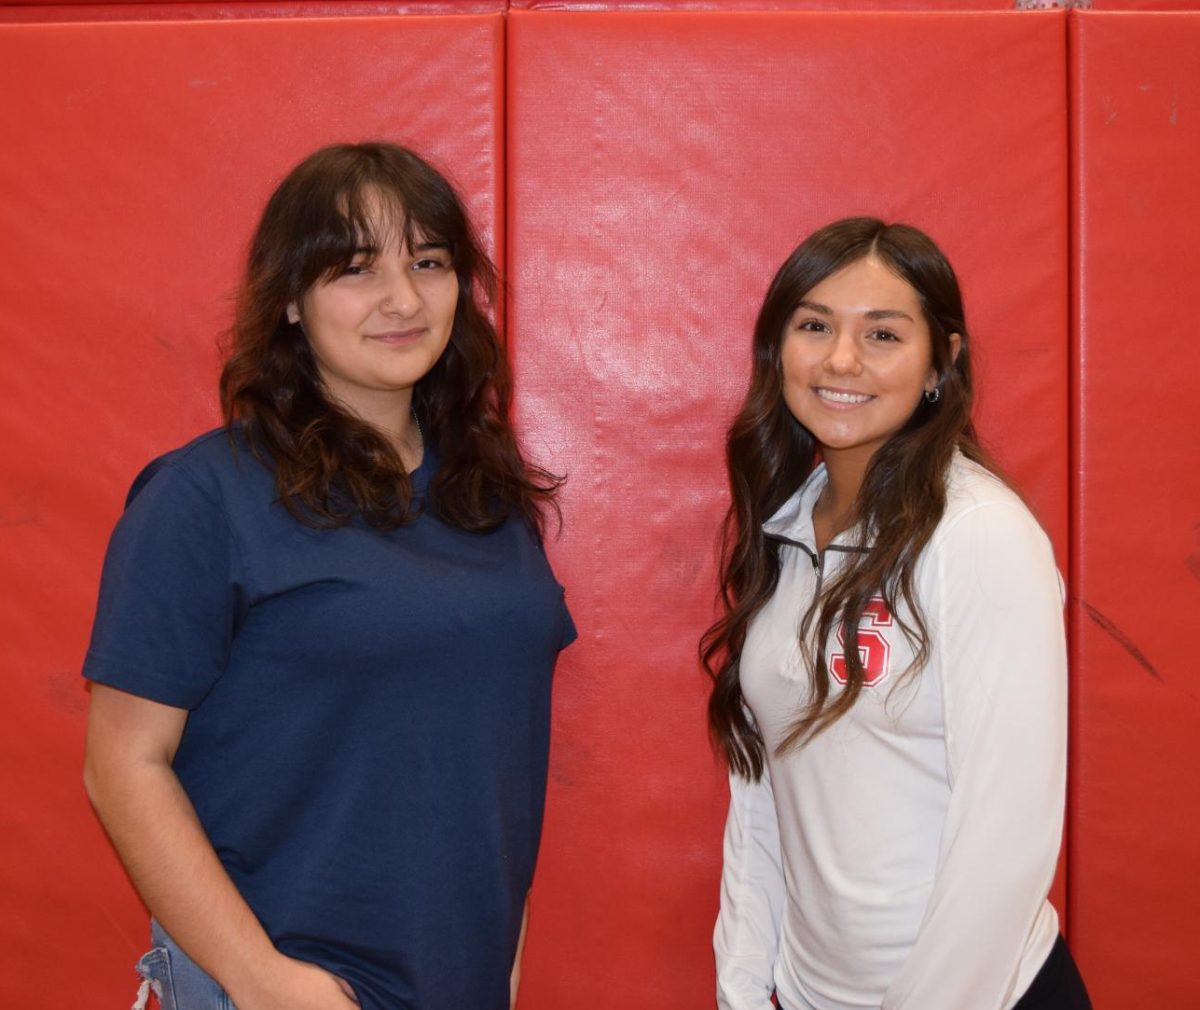 Gracey Martinez (left) and Laci Ekoniak (right) were selected as Student Athletes of the Week by their coaches.